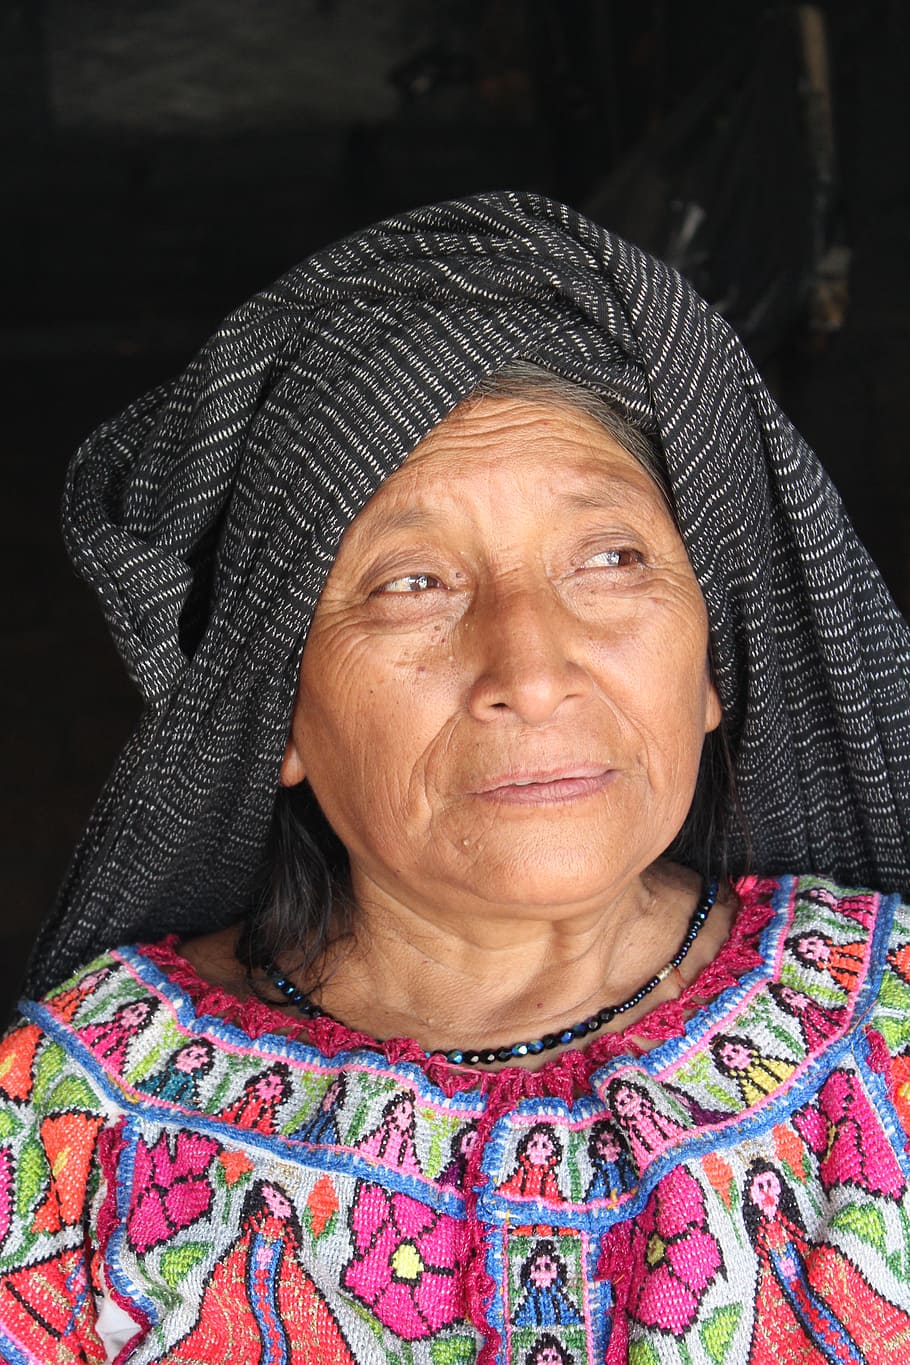 woman, black, scarf, head, women, indian, mexico, oaxaca, poverty, traditional clothes